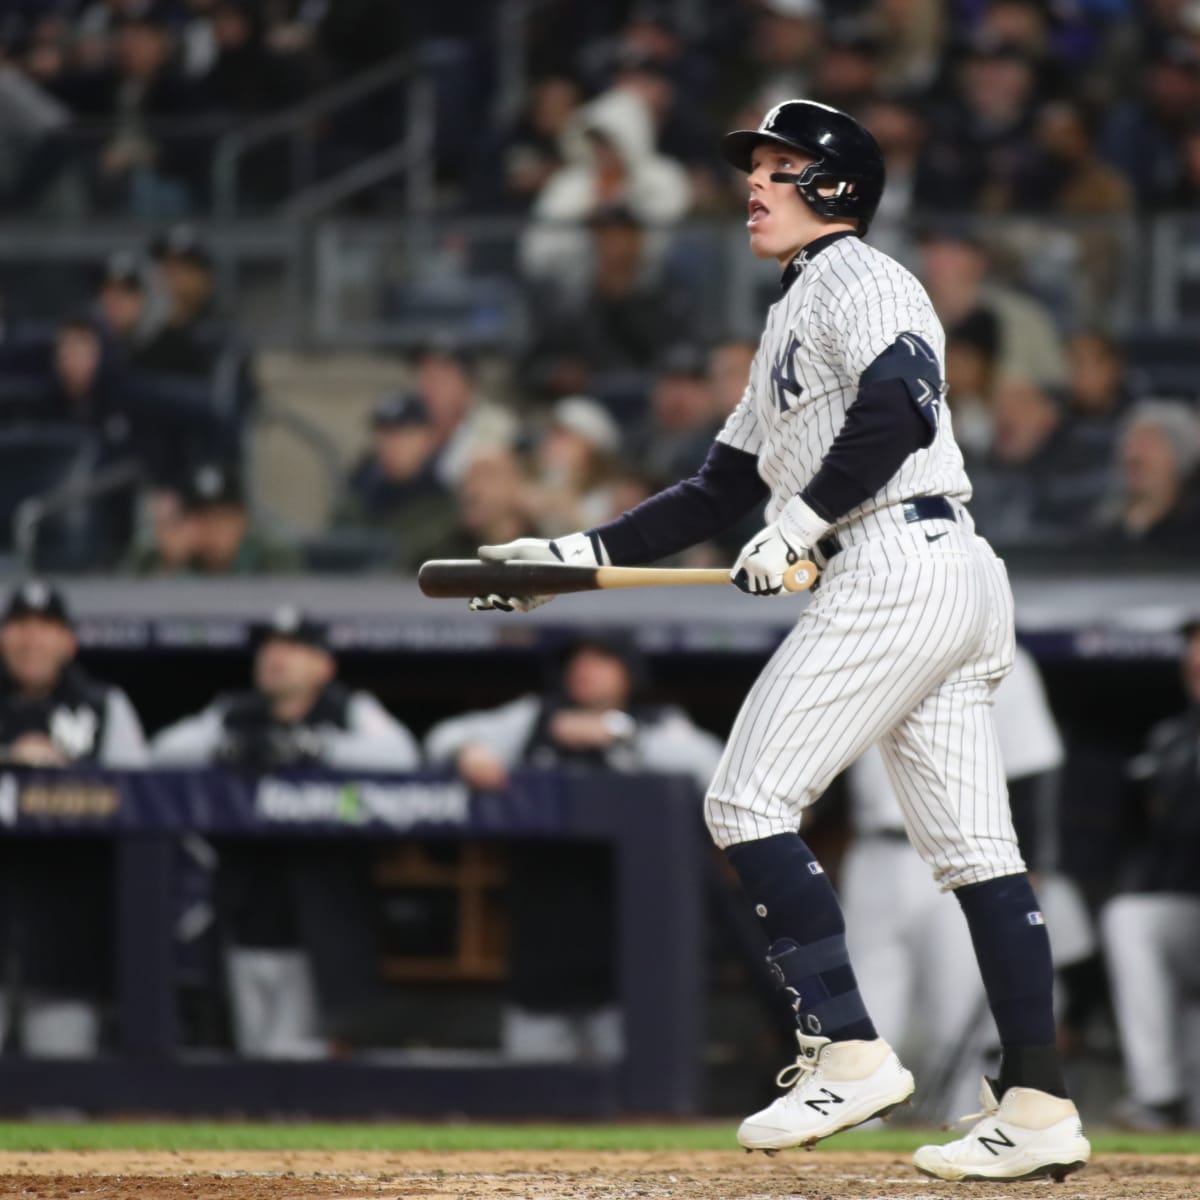 Harrison Bader making his first Yankees appearance Tuesday. : r